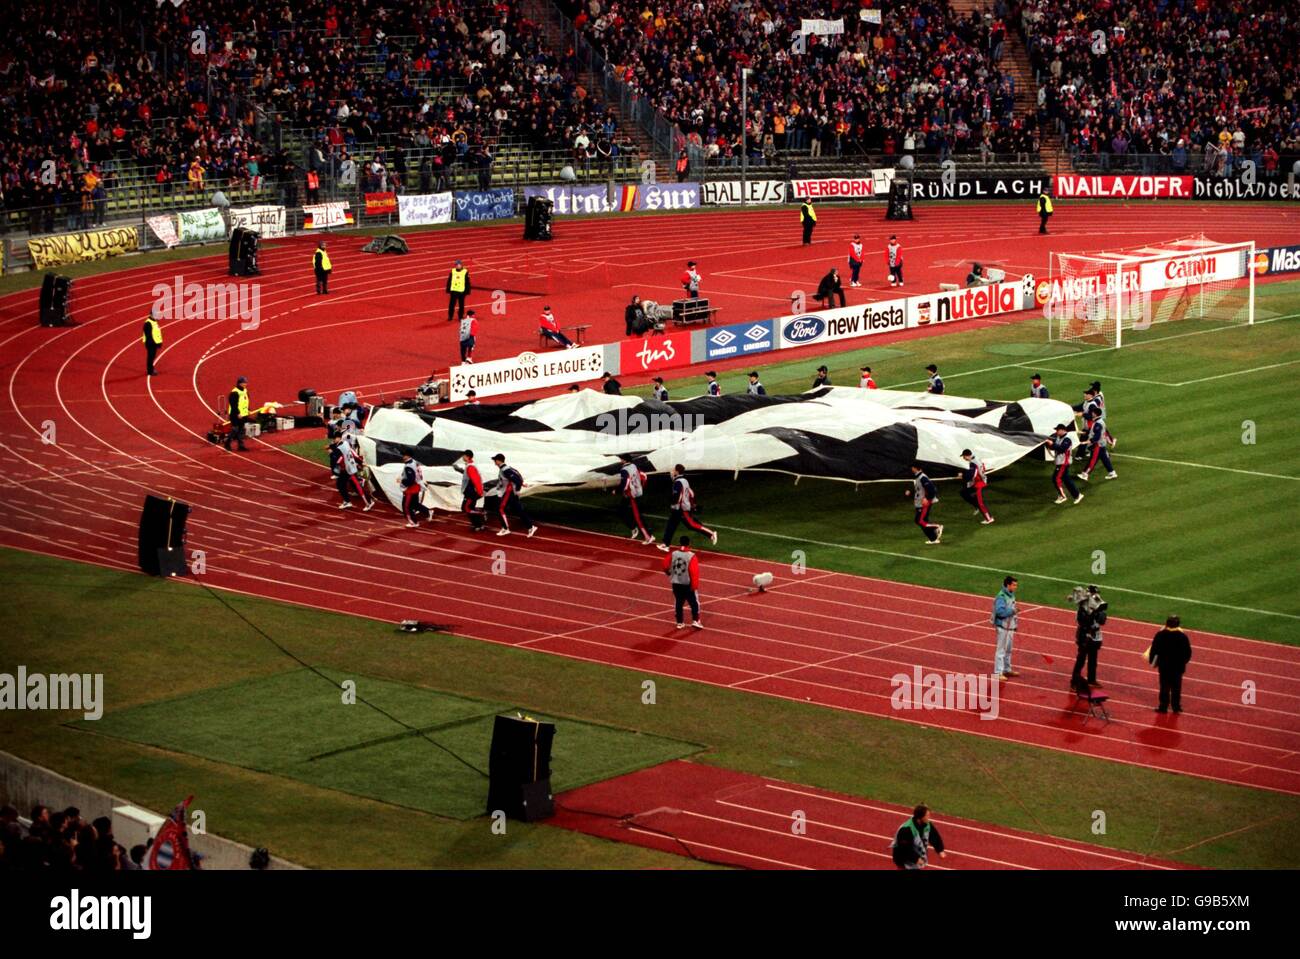 Soccer - UEFA Champions League - Group C - Bayern Munich v Real Madrid. The ball boys remove the giant Champions league logo from the centre of the pitch before the match Stock Photo